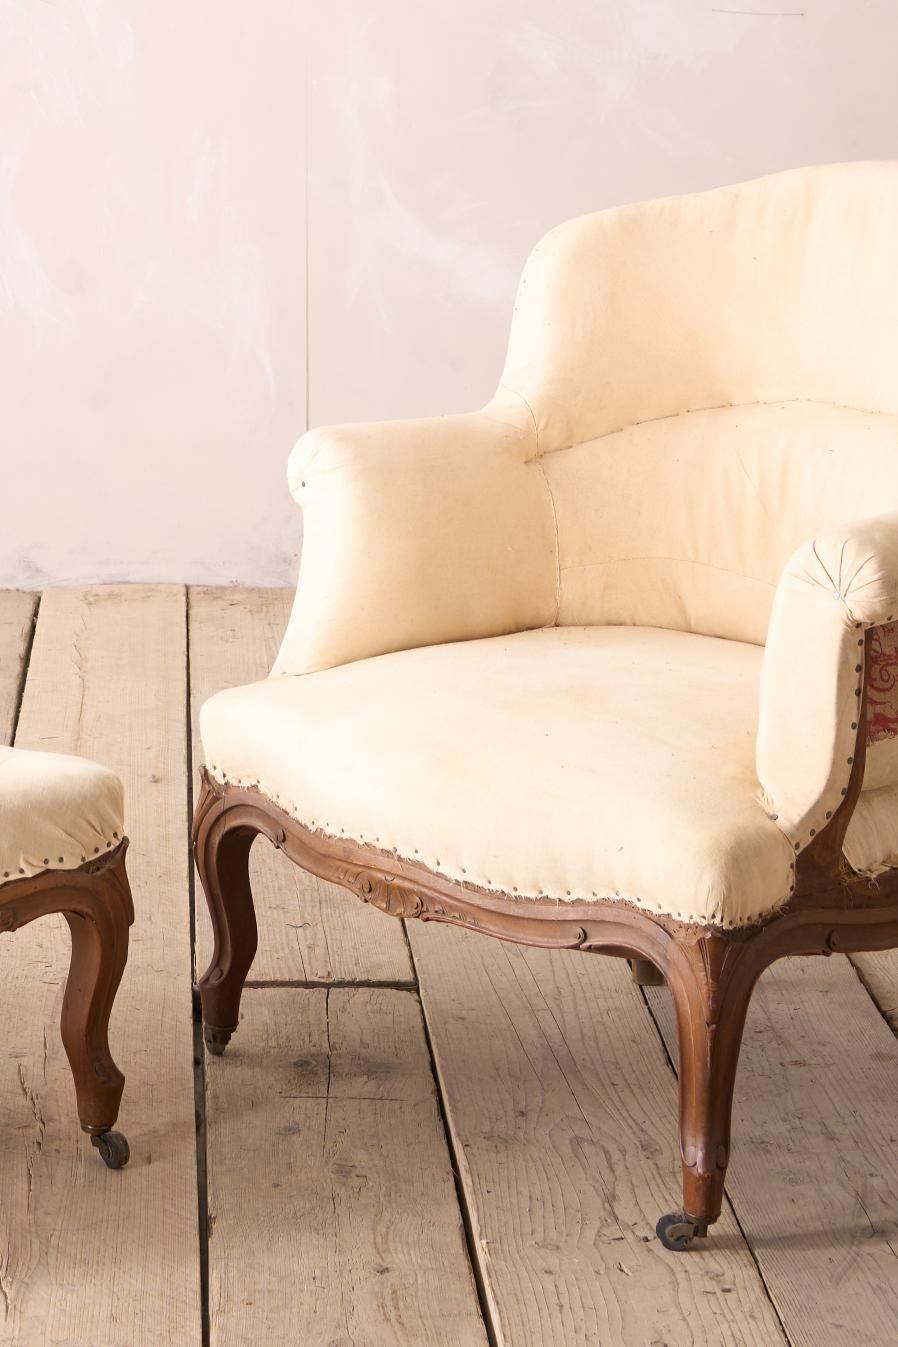 This is a great looking and increasingly harder set to find. A wonderful shield back armchair with carved frame and a waisted footstool with carved details as well. Neat set and a great feature in a room. Ideal for lounging in with a good book or